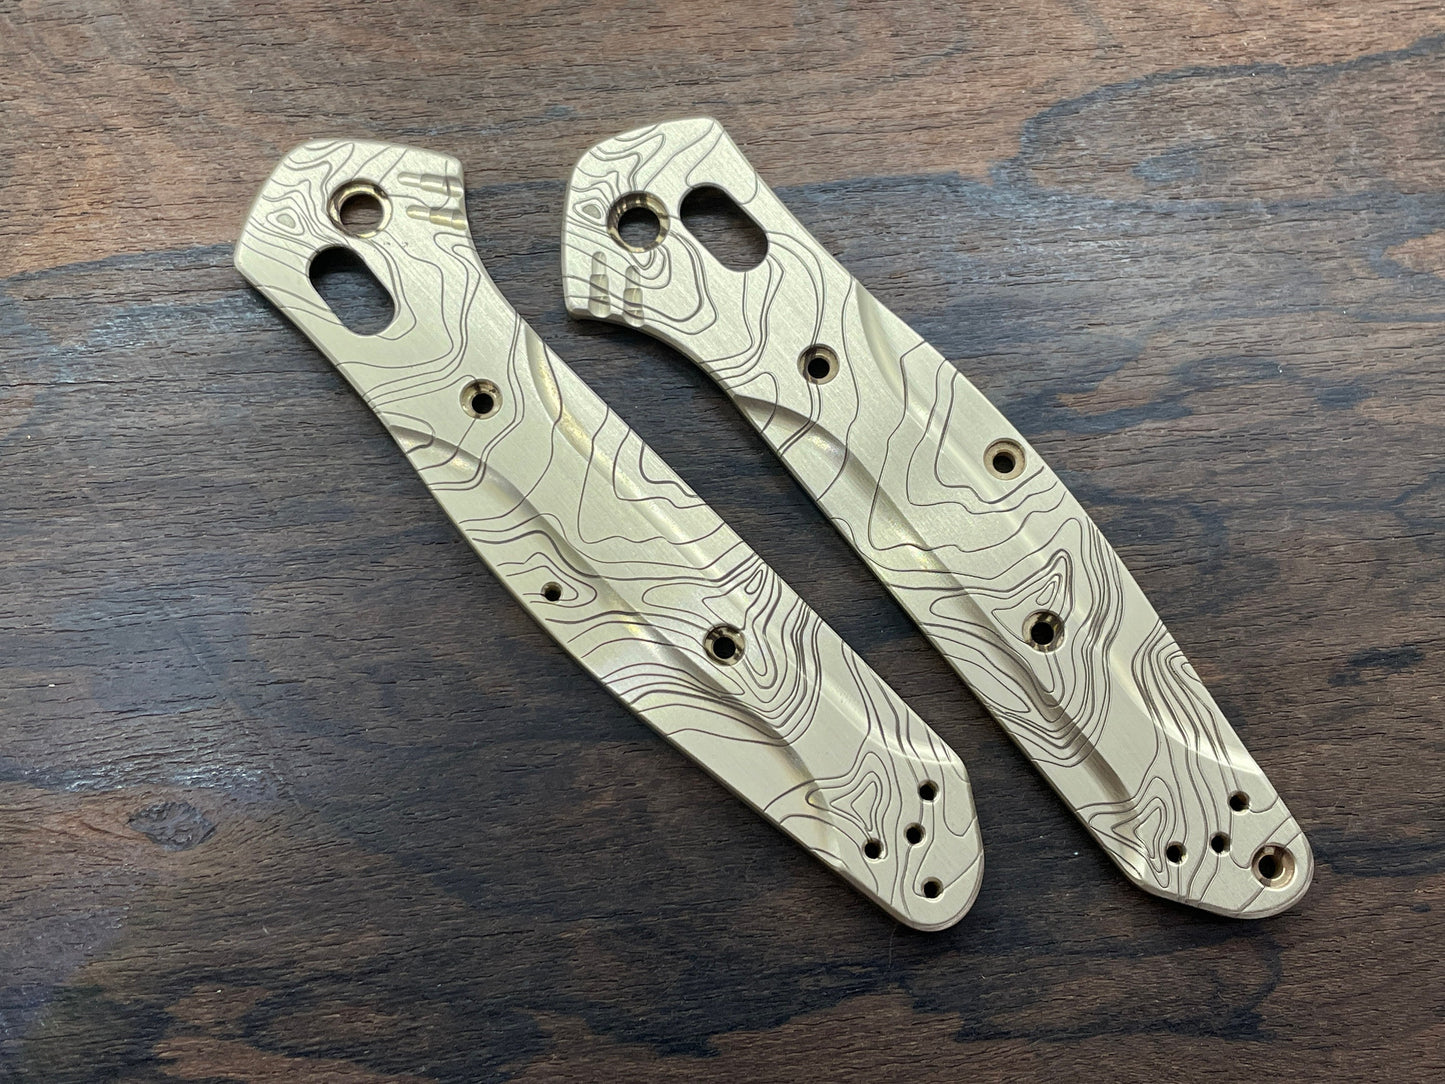 TOPO engraved Brass Scales for Benchmade 940 Osborne